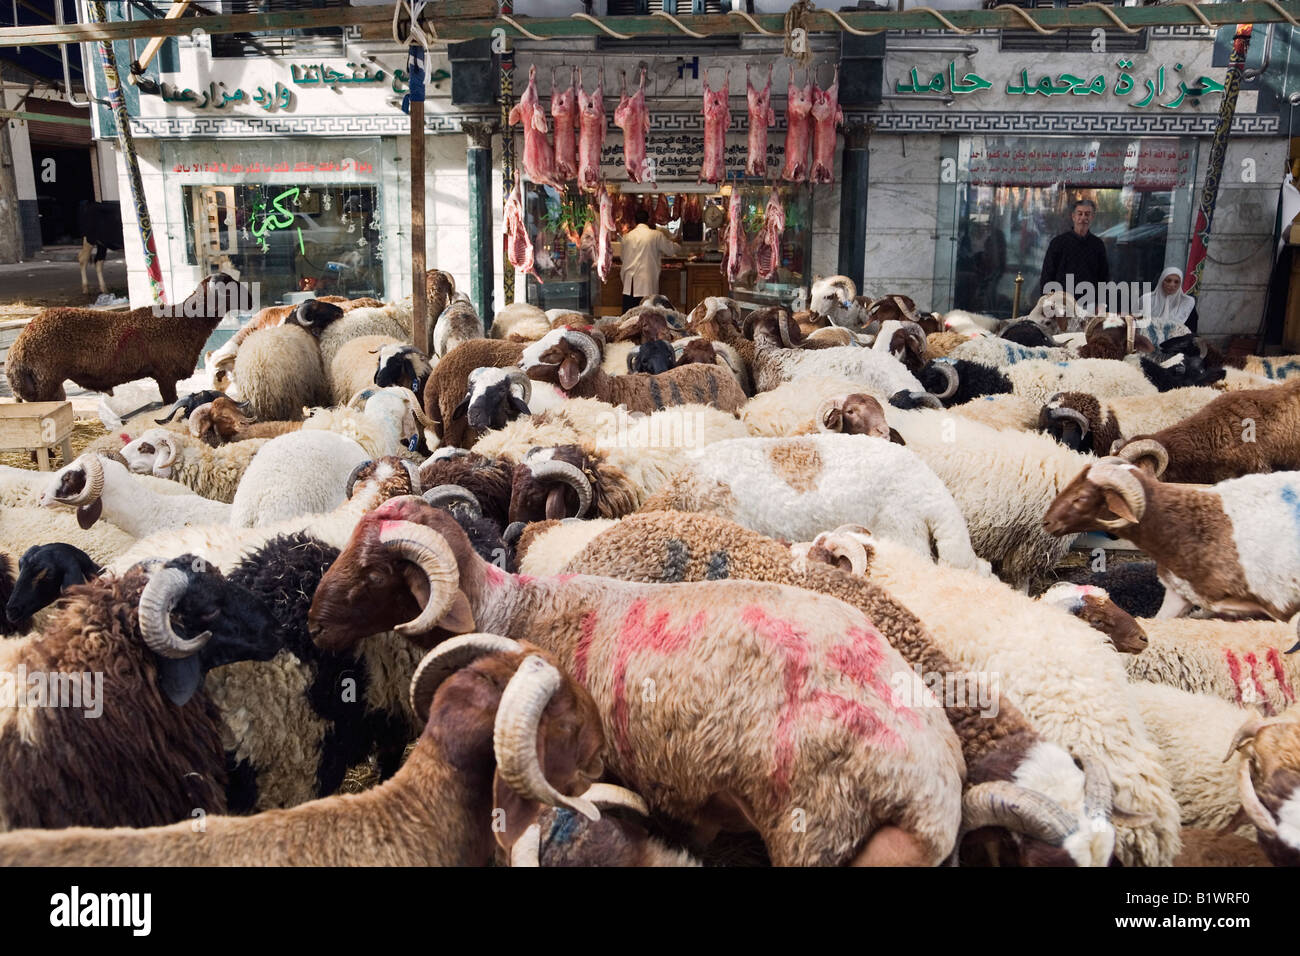 Alexandria, Egypt. Sheep for sale in livestock market, butcher s shop in background Stock Photo